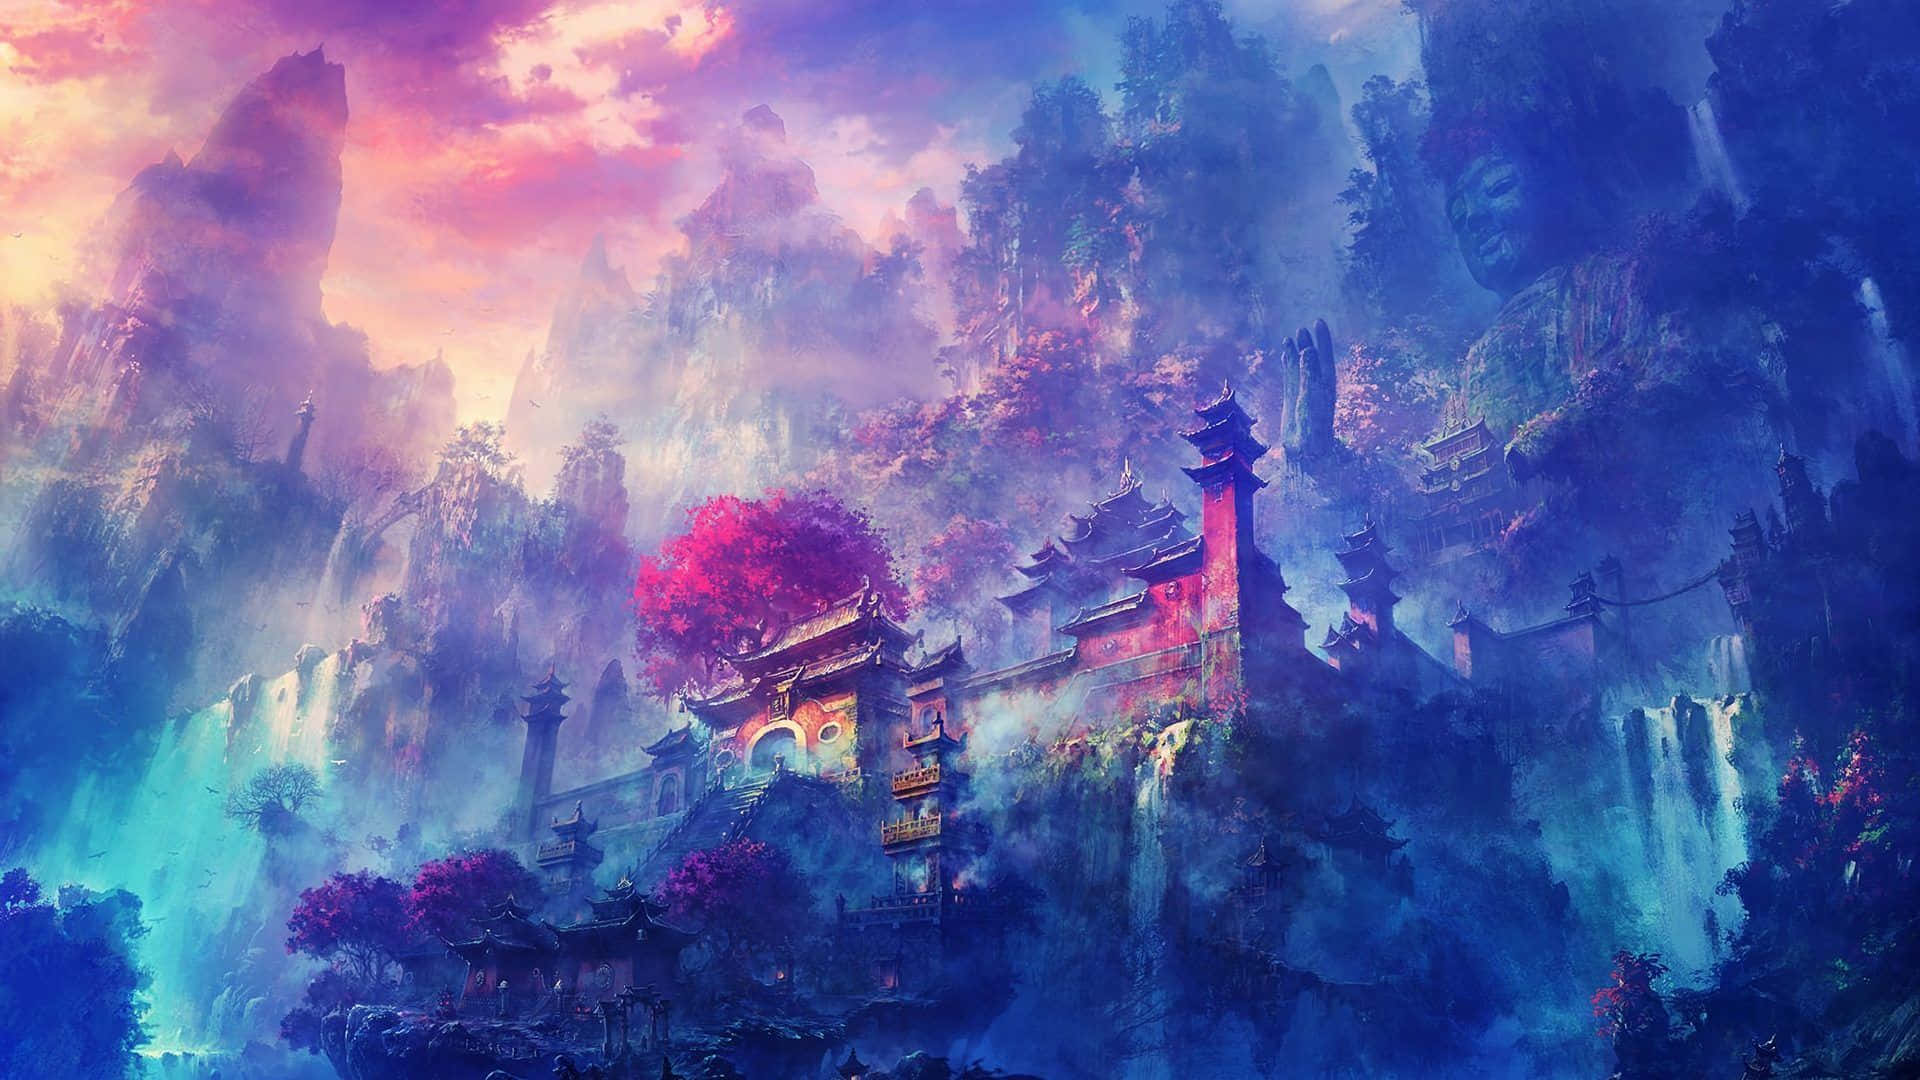 A peaceful, calming anime landscape surrounded by a vast sky.